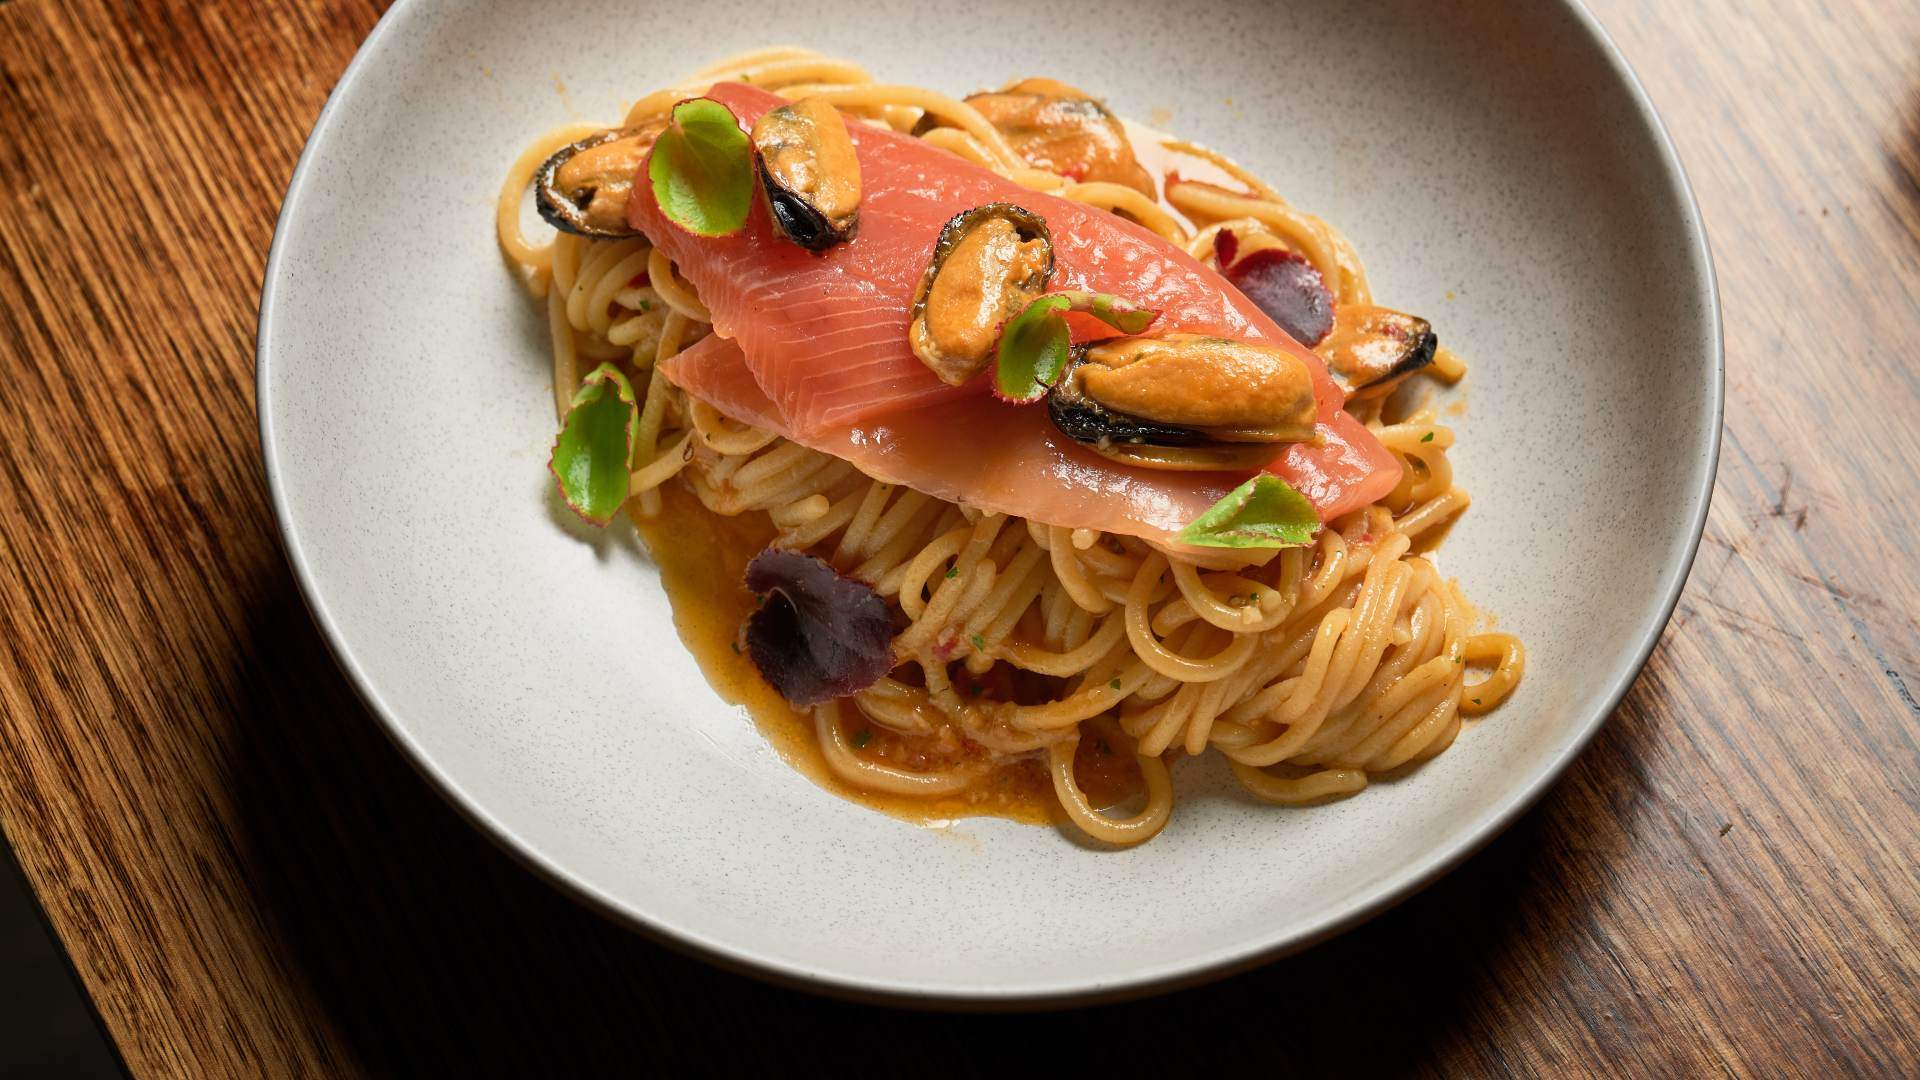 Seafood pasta at Tip00 - one of the best restaurants in Melbourne